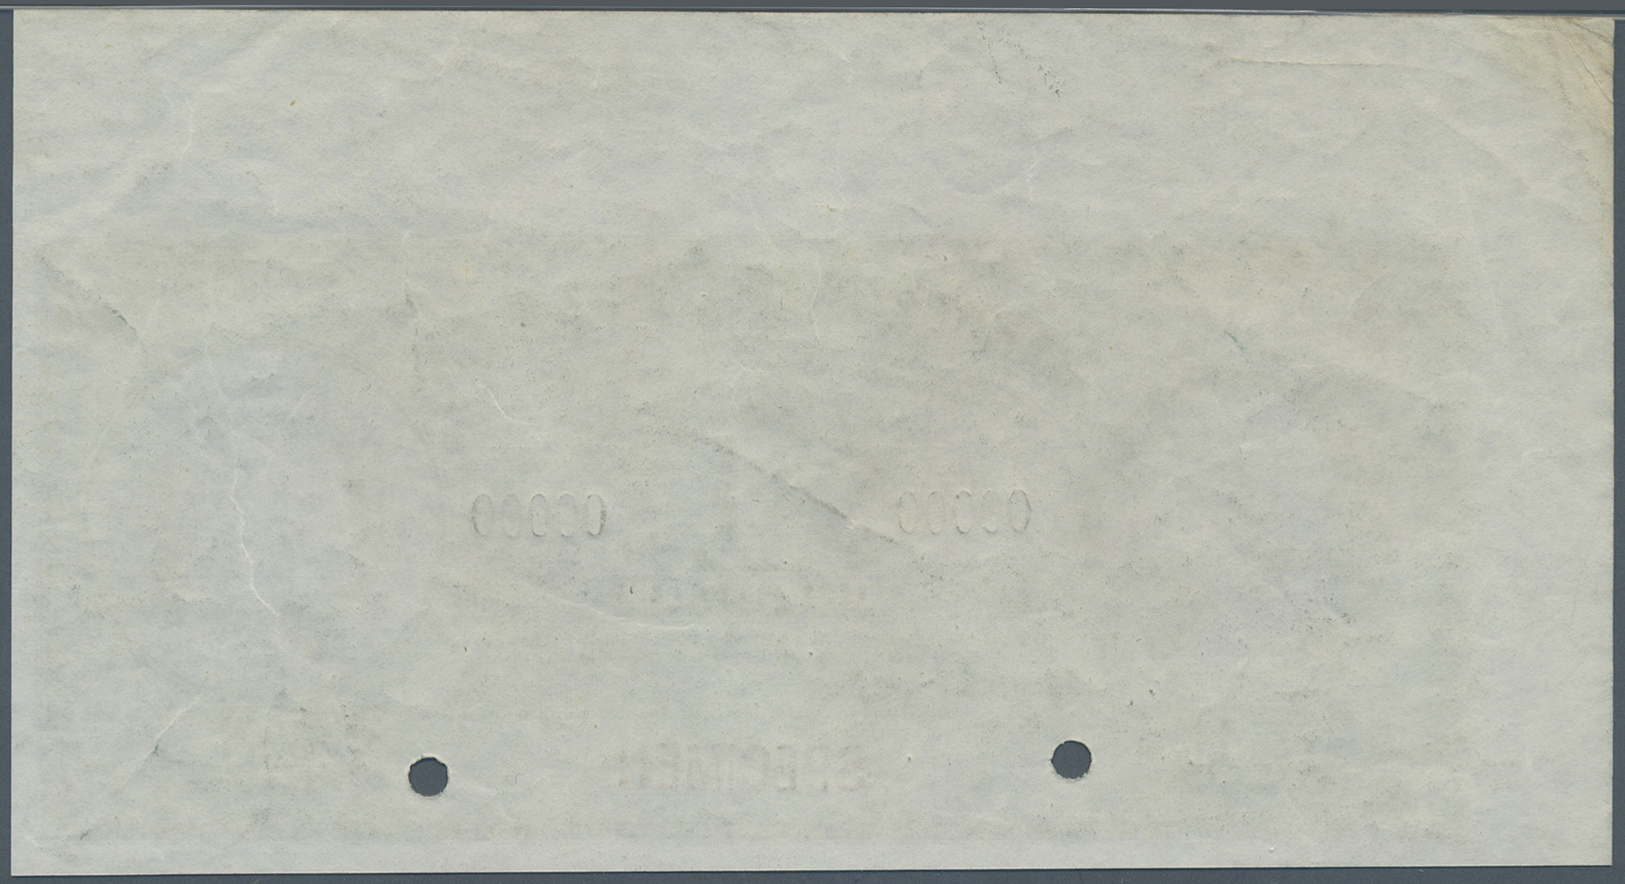 00589 Costa Rica: 1 Colon ND(1905-06) SPECIMEN, P.142s With Hand Stamped Date July 1903 At Upper Part Of The Paper Sheet - Costa Rica